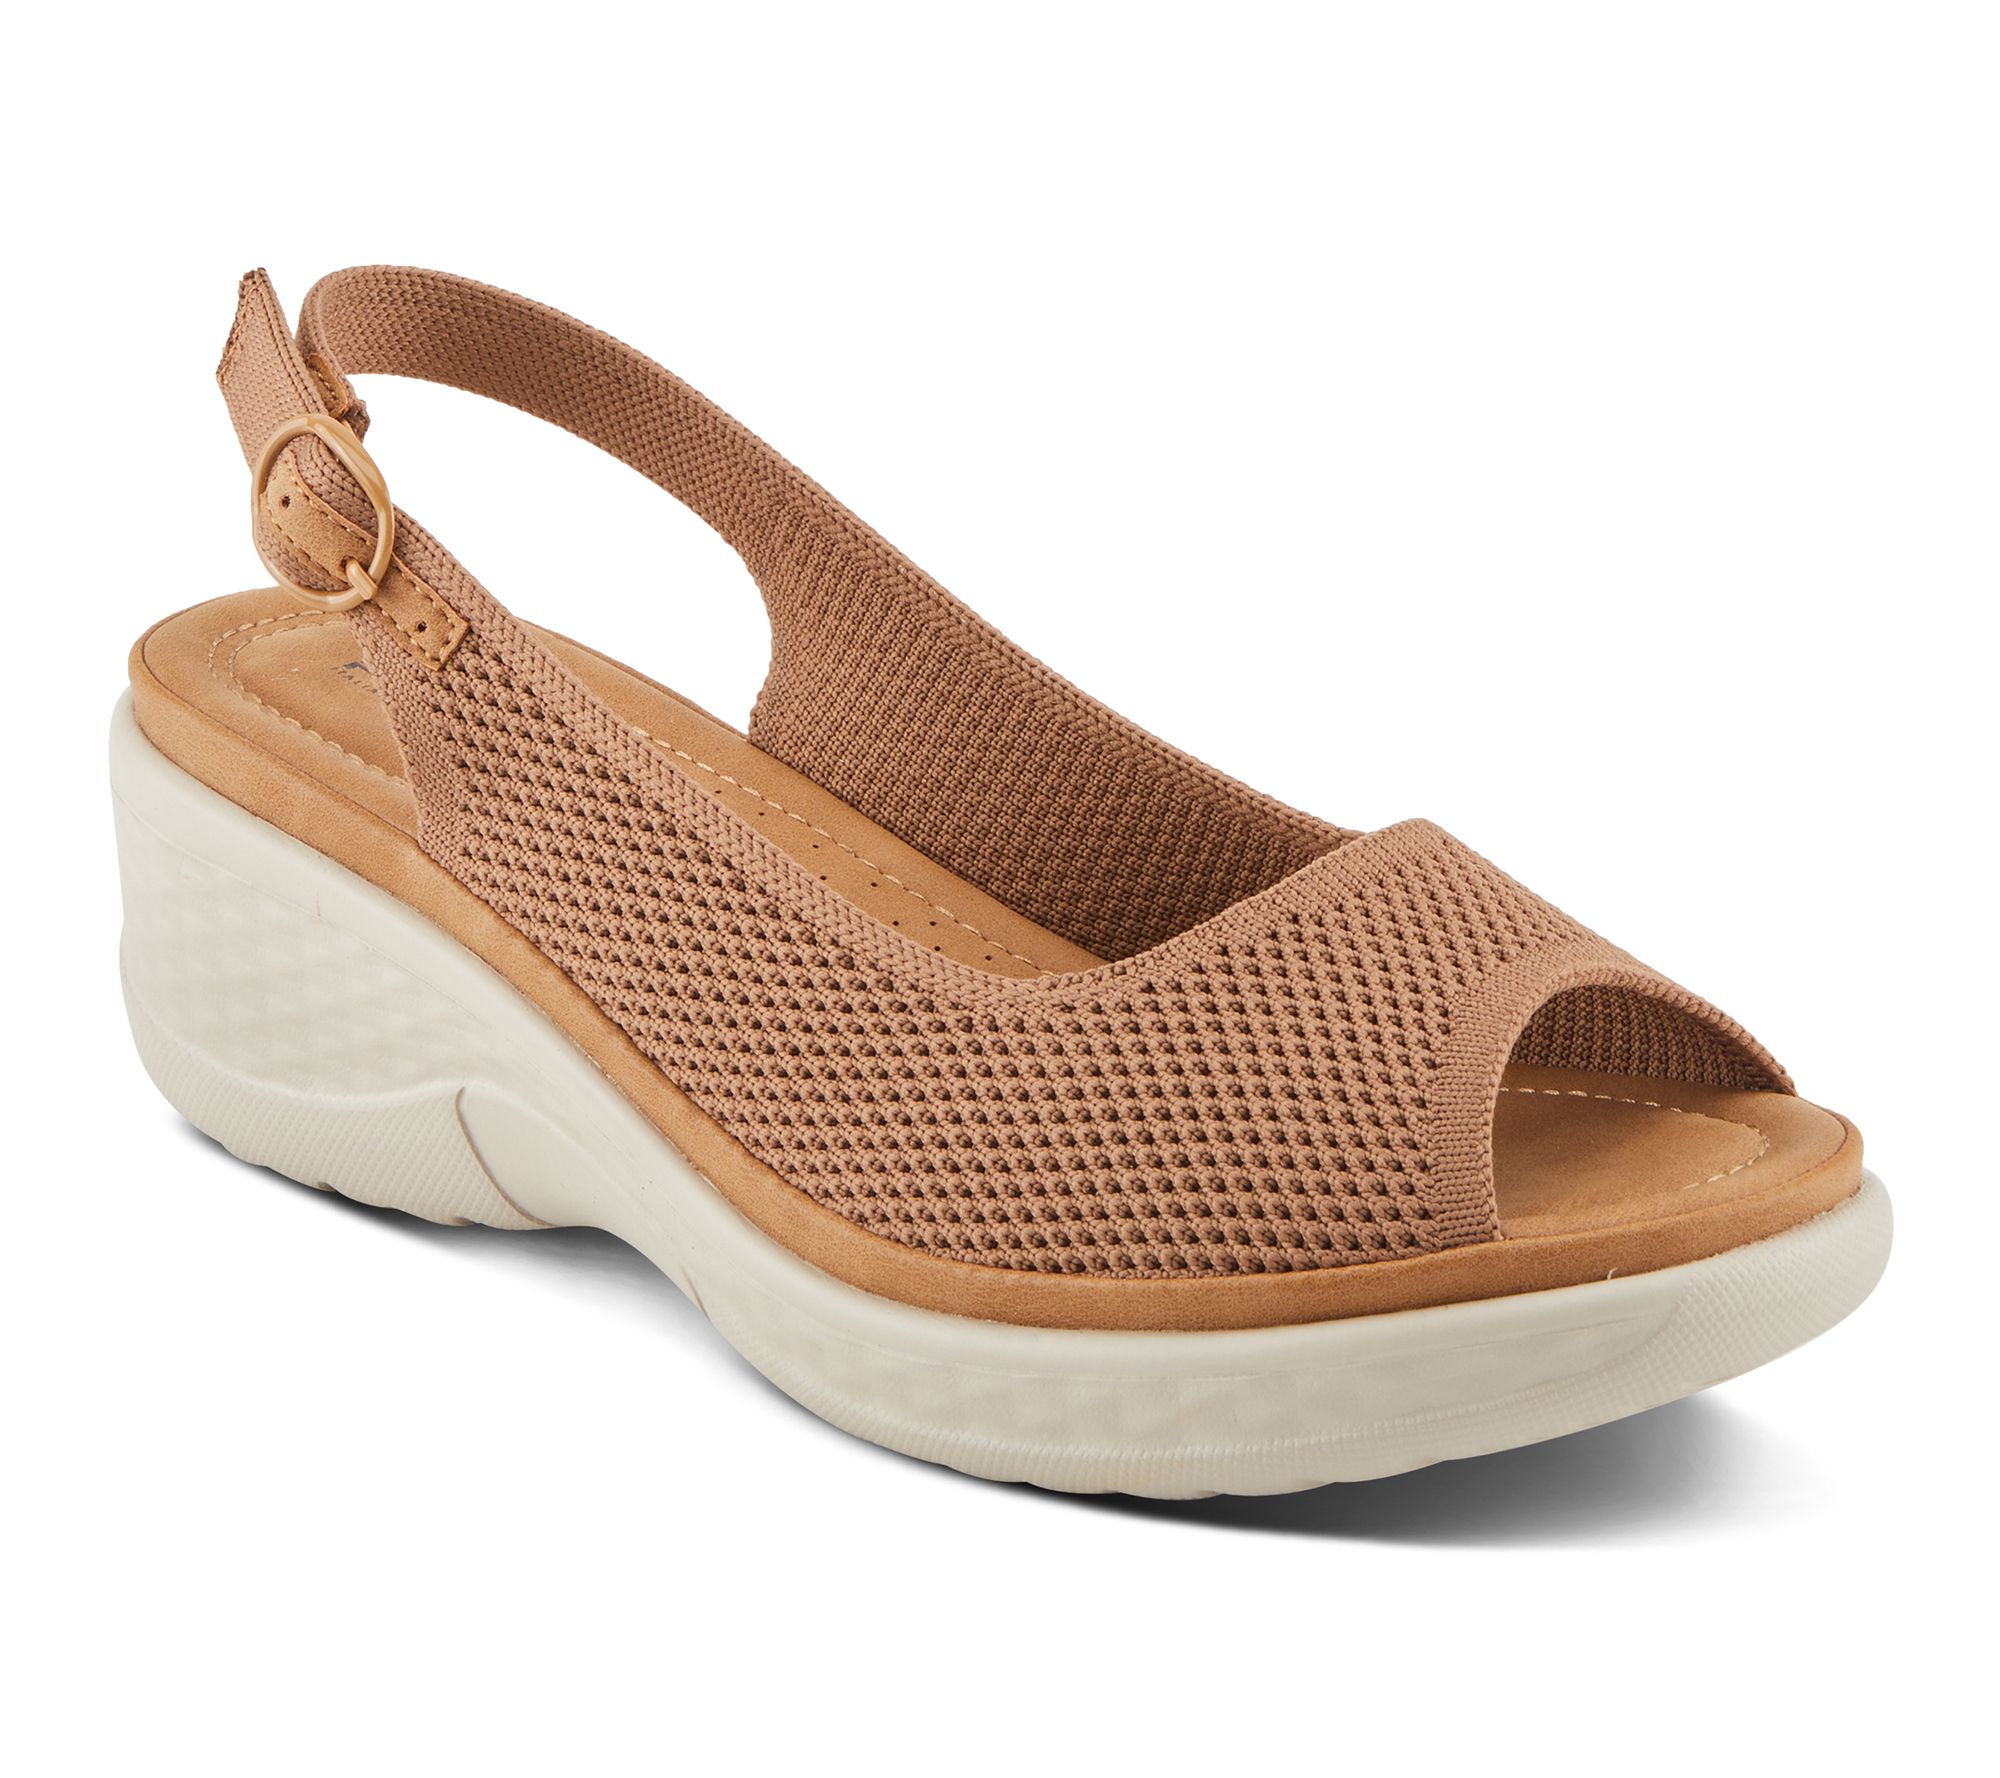 Flexus by Spring Step Slingback Wedge Sandals -Mayberry - QVC.com